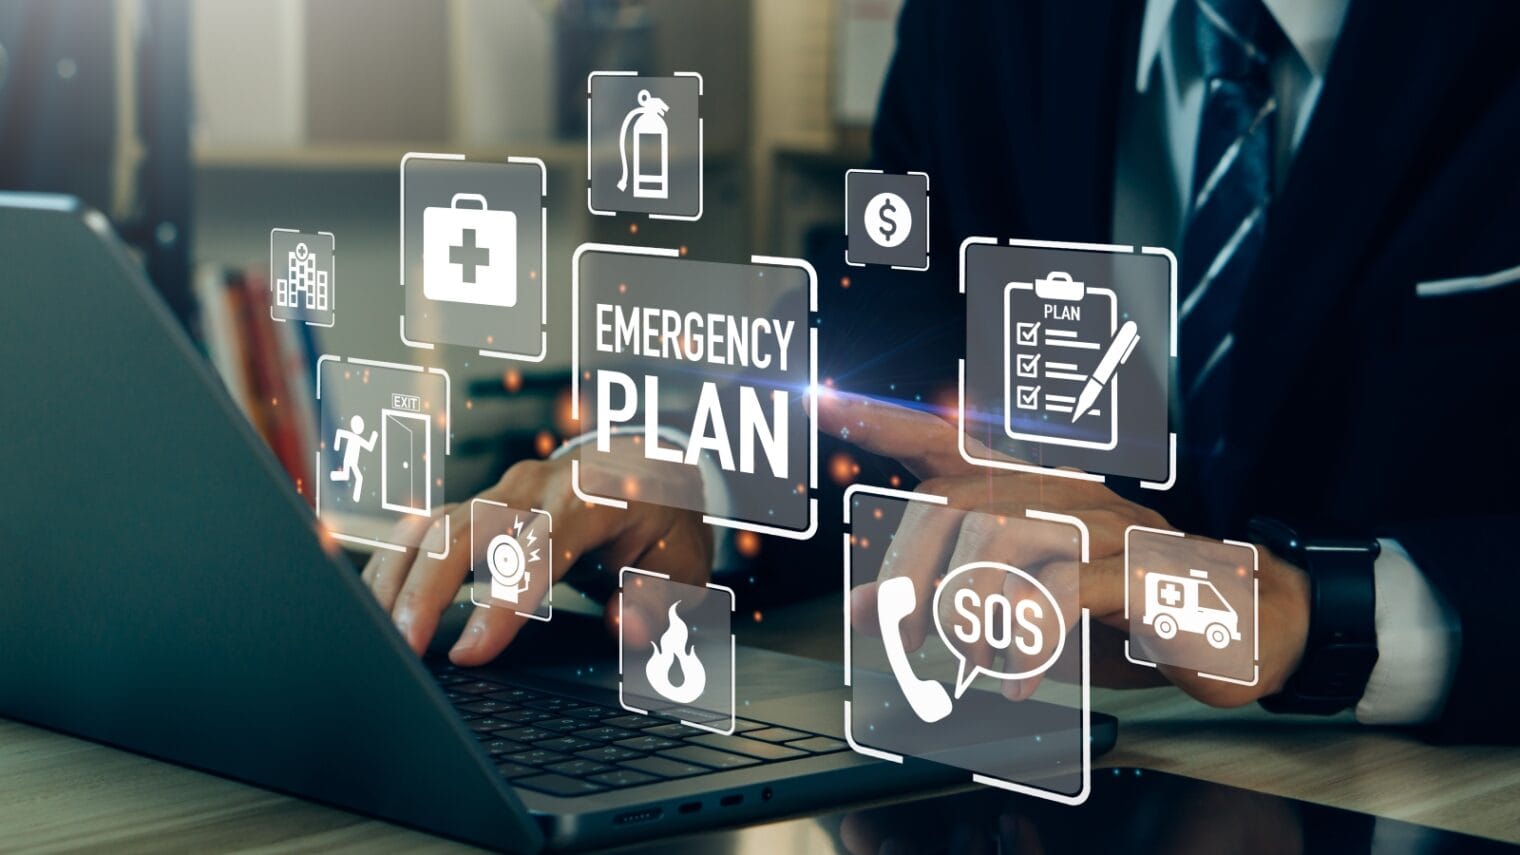 Planning for a disaster helps businesses weather emergency situations. Photo illustration by Witsarut Sakorn via Shutterstock.com